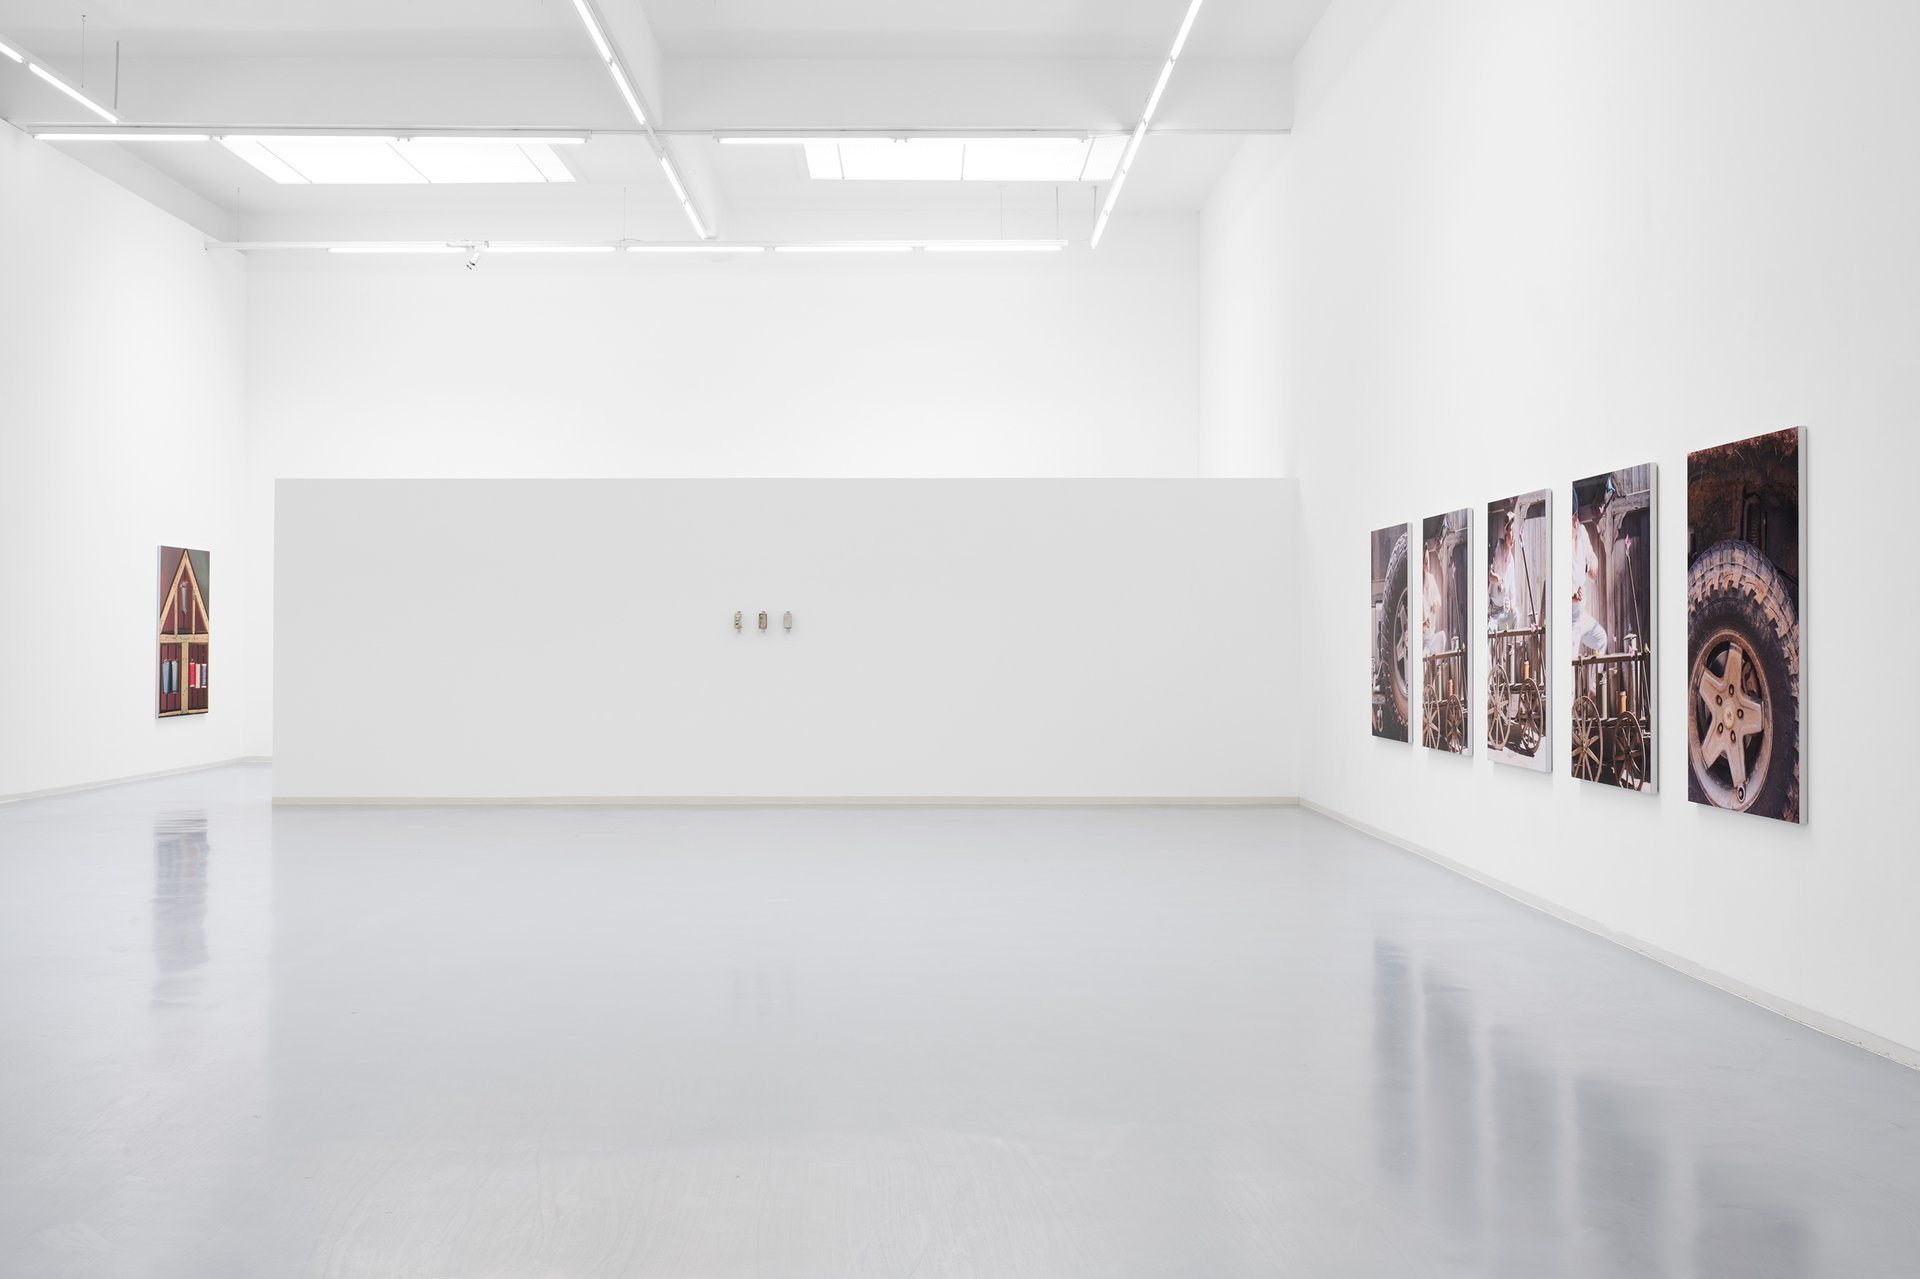 Lucie Stahl: Seven Sisters, installation view, Bonner Kunstverein, 2022. Courtesy the artist, Cabinet Gallery, London, dépendance, Brussels, Fitzpatrick Gallery, Paris and Los Angeles, and Galerie Meyer Kainer, Vienna. Photo: Mareike Tocha.